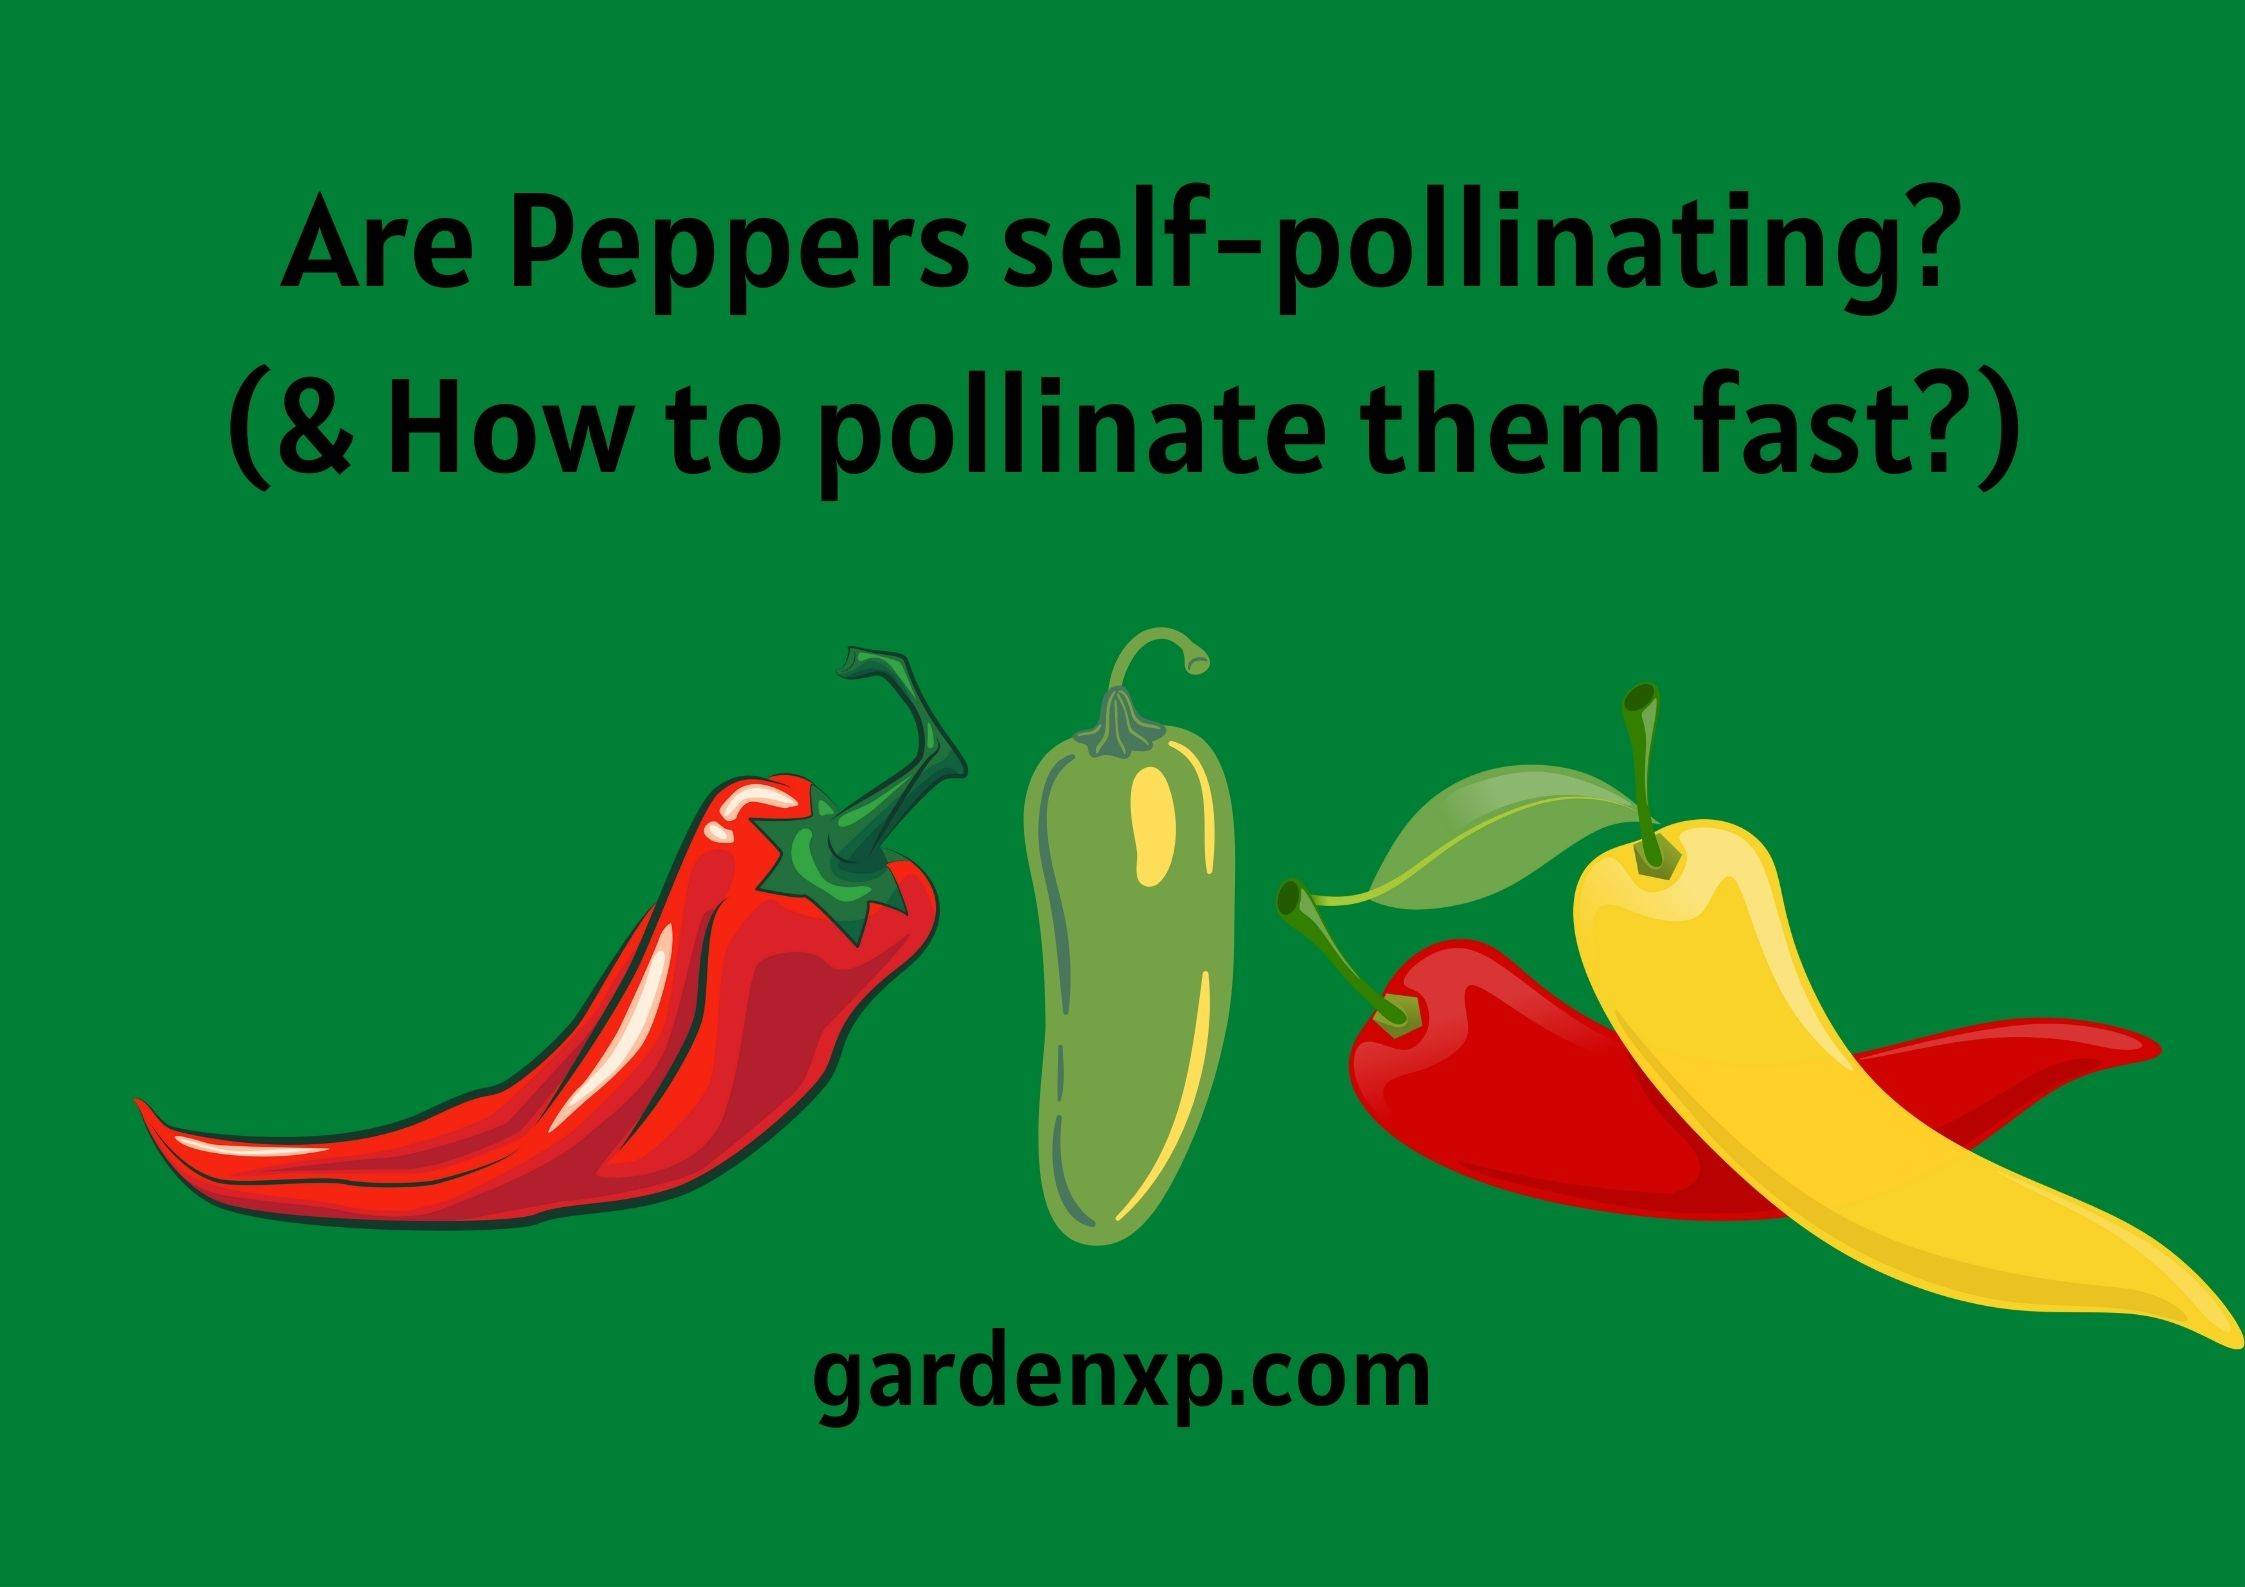 Are Peppers self-pollinating? (& How to pollinate them fast?)